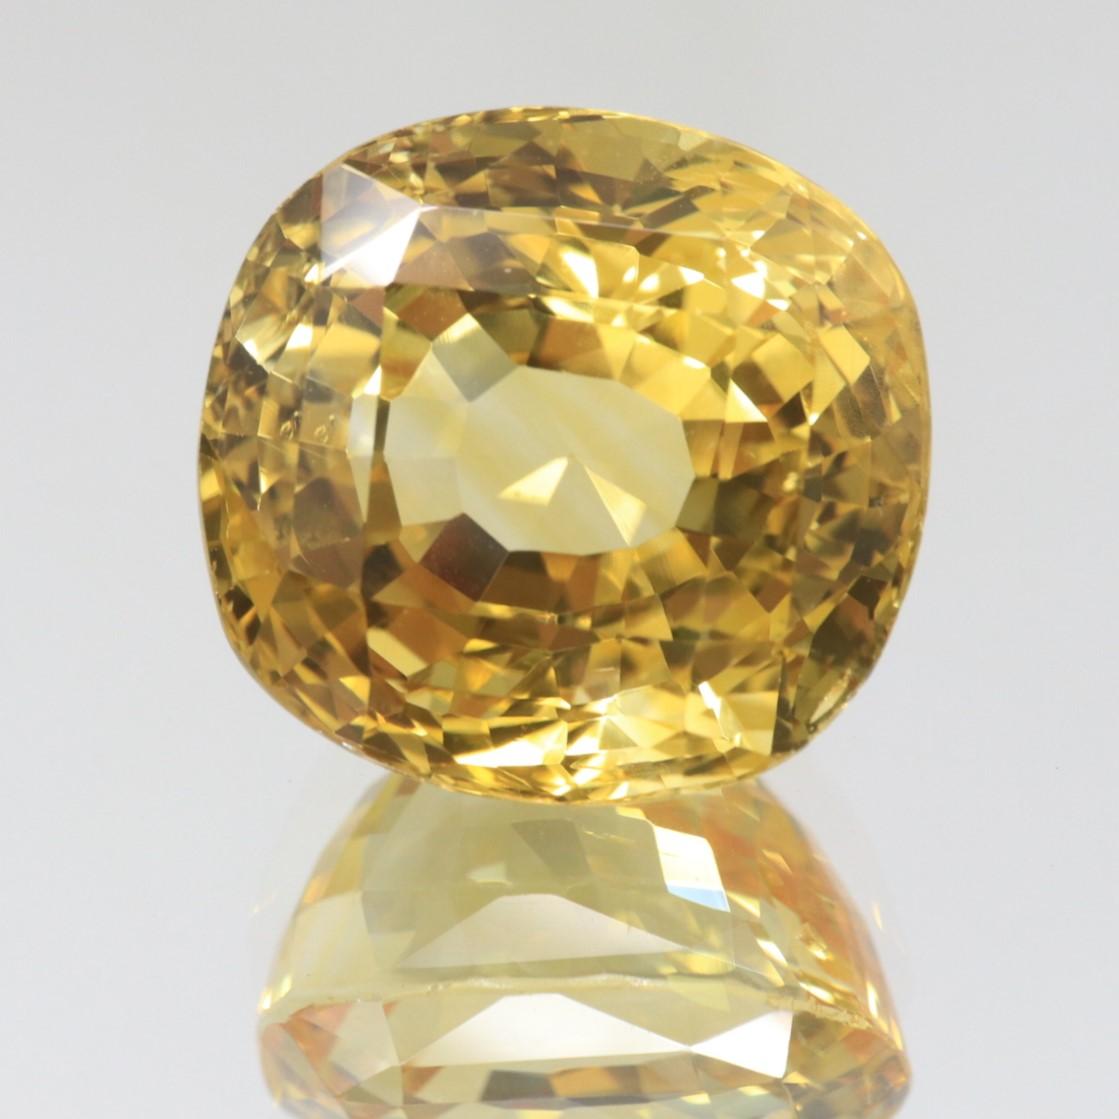 Cushion Cut GIA Certified 40.11 Carat Loose Untreated Natural Cushion Yellow Sapphire  For Sale